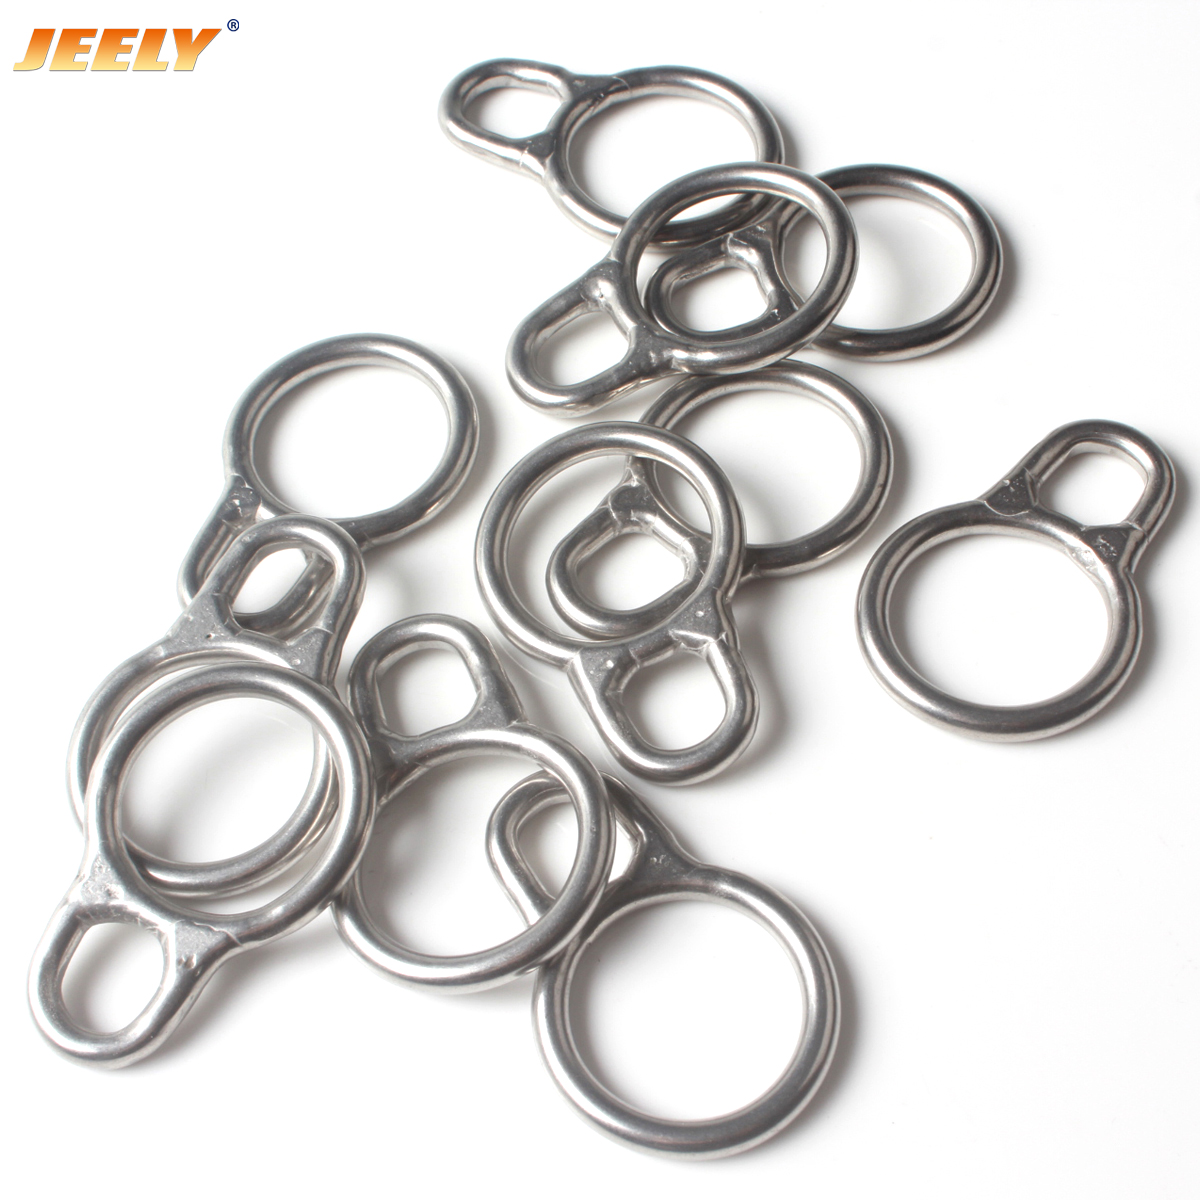 Stainless steel kitesurfing safety ring from China manufacturer - JEELY